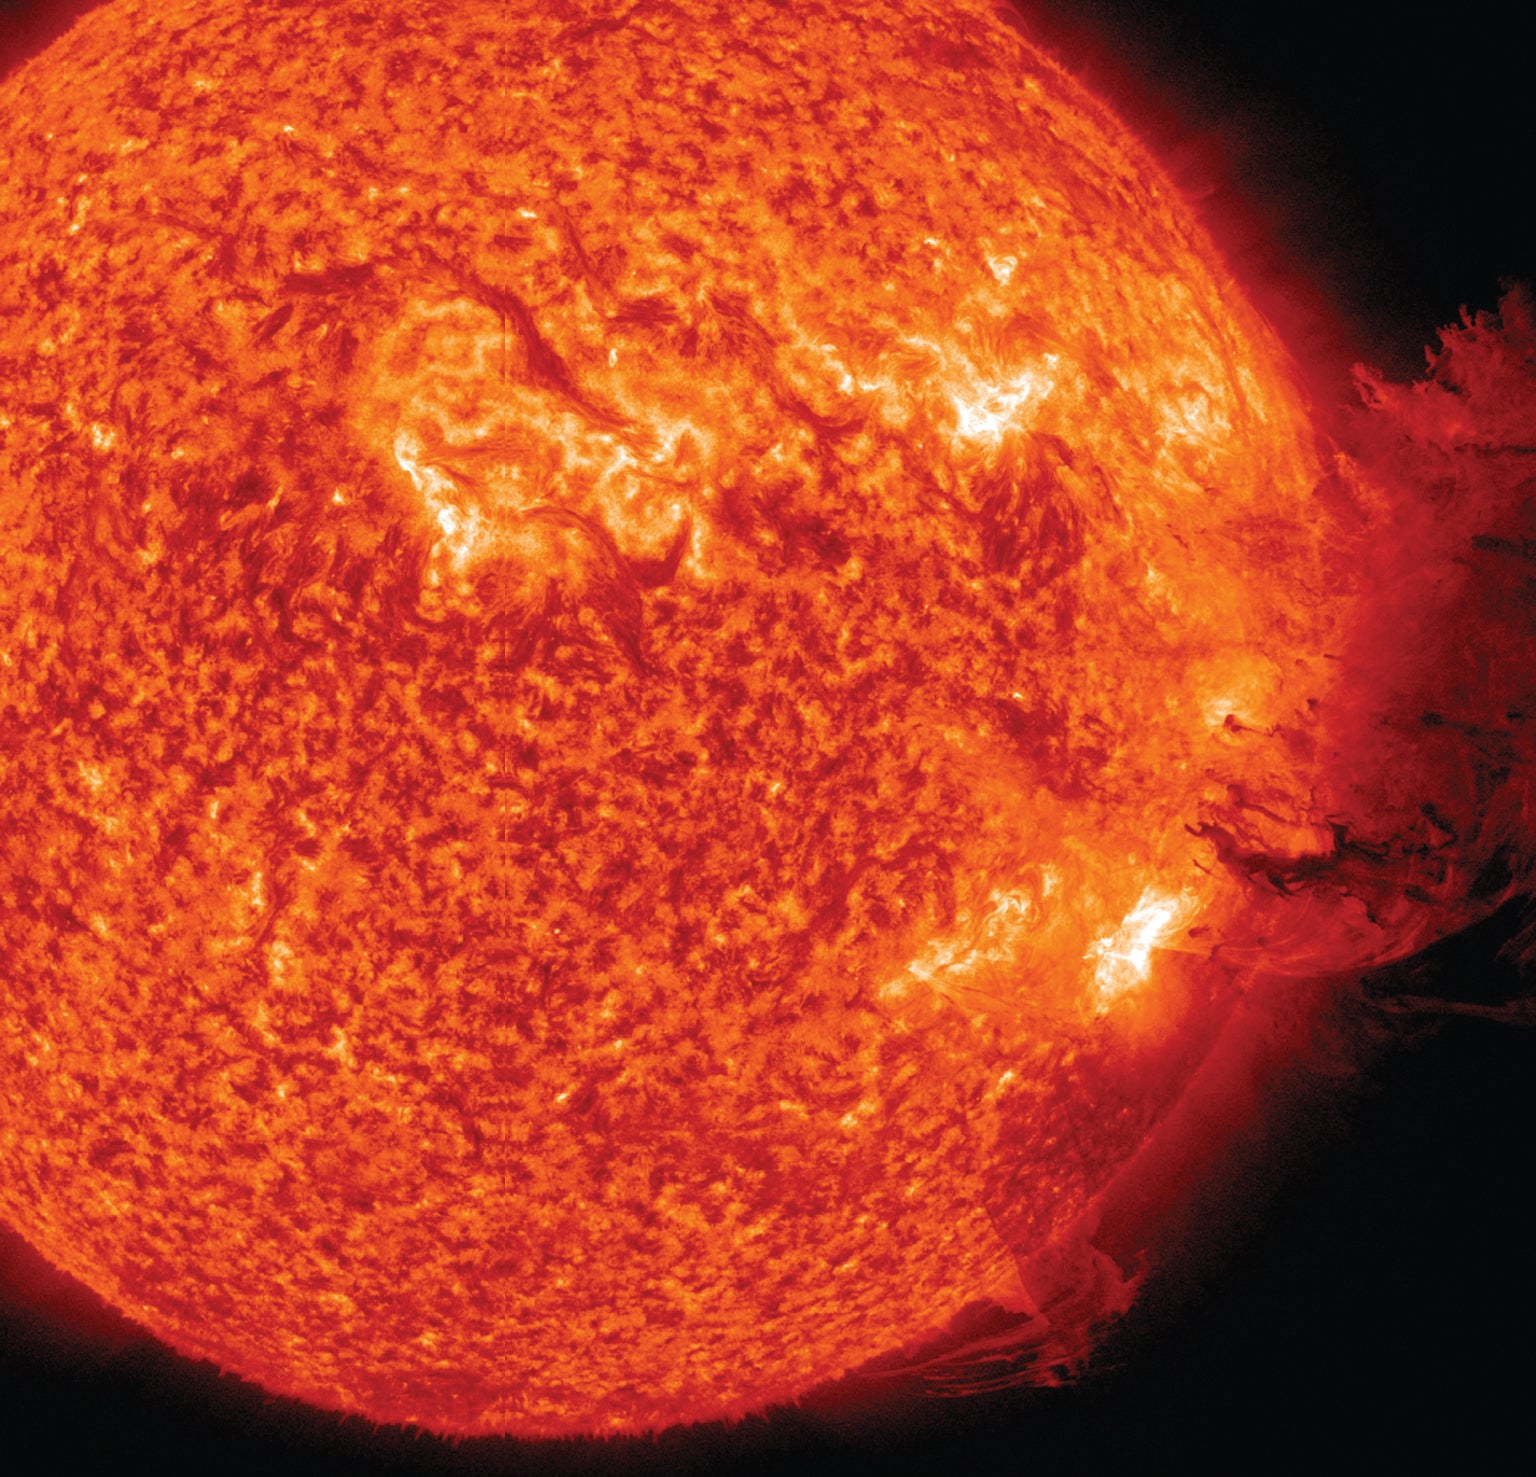 Solar flares and sheets of glowing plasma rise from a region of intense activity on the sun.